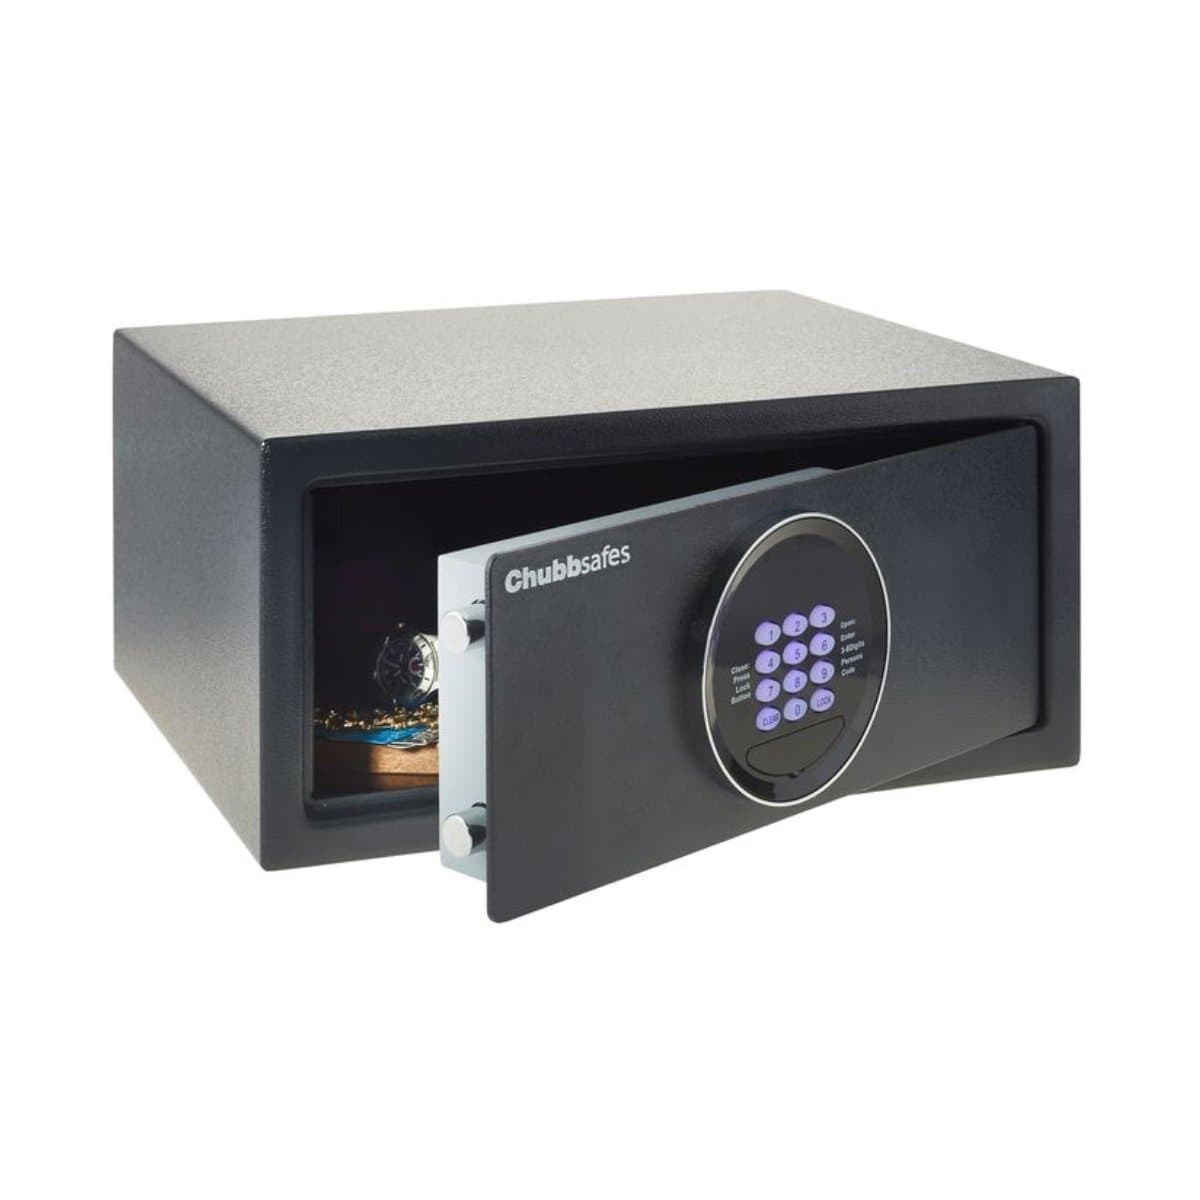 Chubbsafes AIR HOTEL Compact Safe 24L, Digital, Anthracite